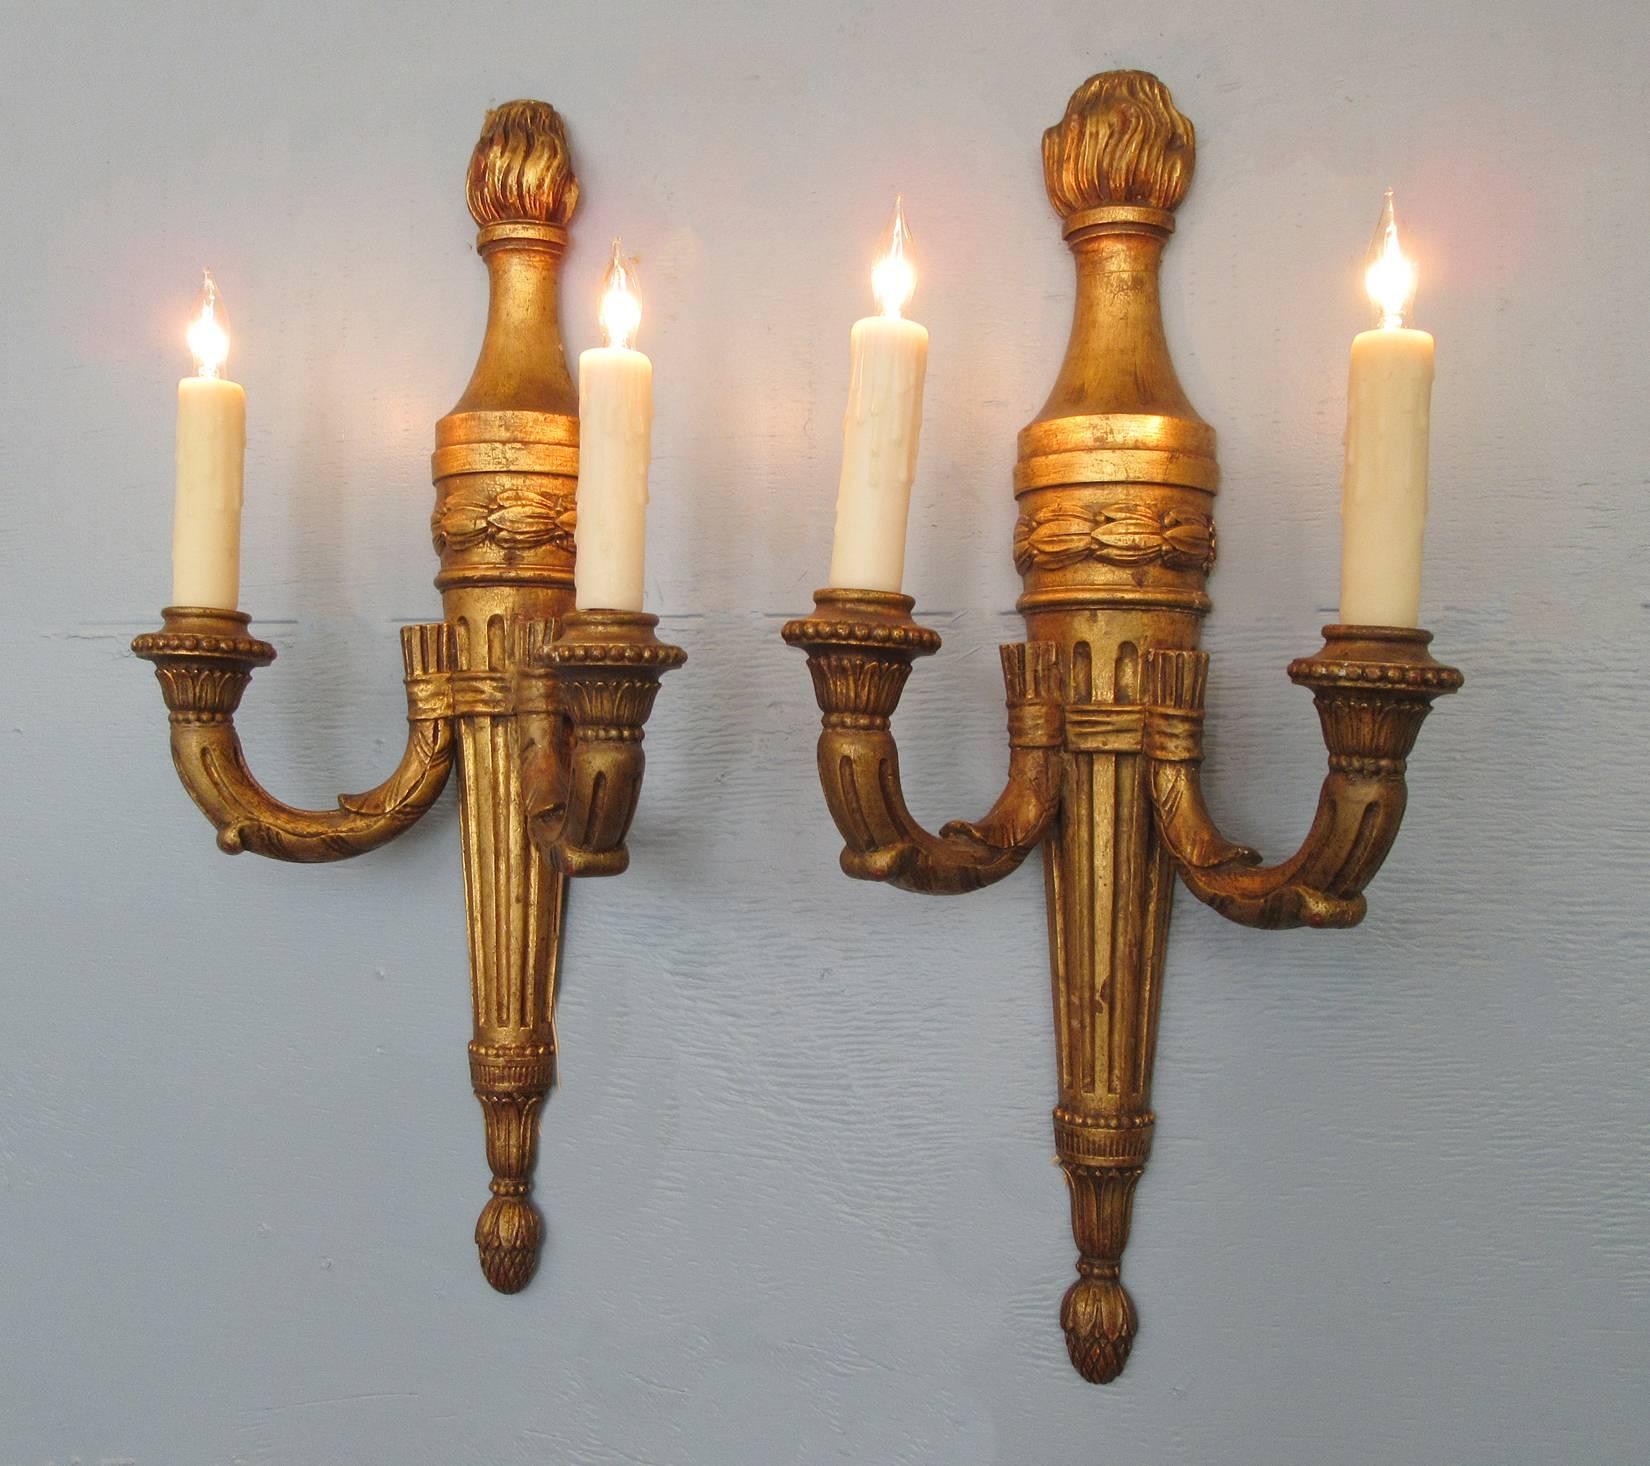 A pair of early 20th century Italian giltwood sconces, circa 1920, each featuring two candle arms fastened to hand-carved fluted torch frames. The pair have been recently been cleaned and rewired with new porcelain sockets.